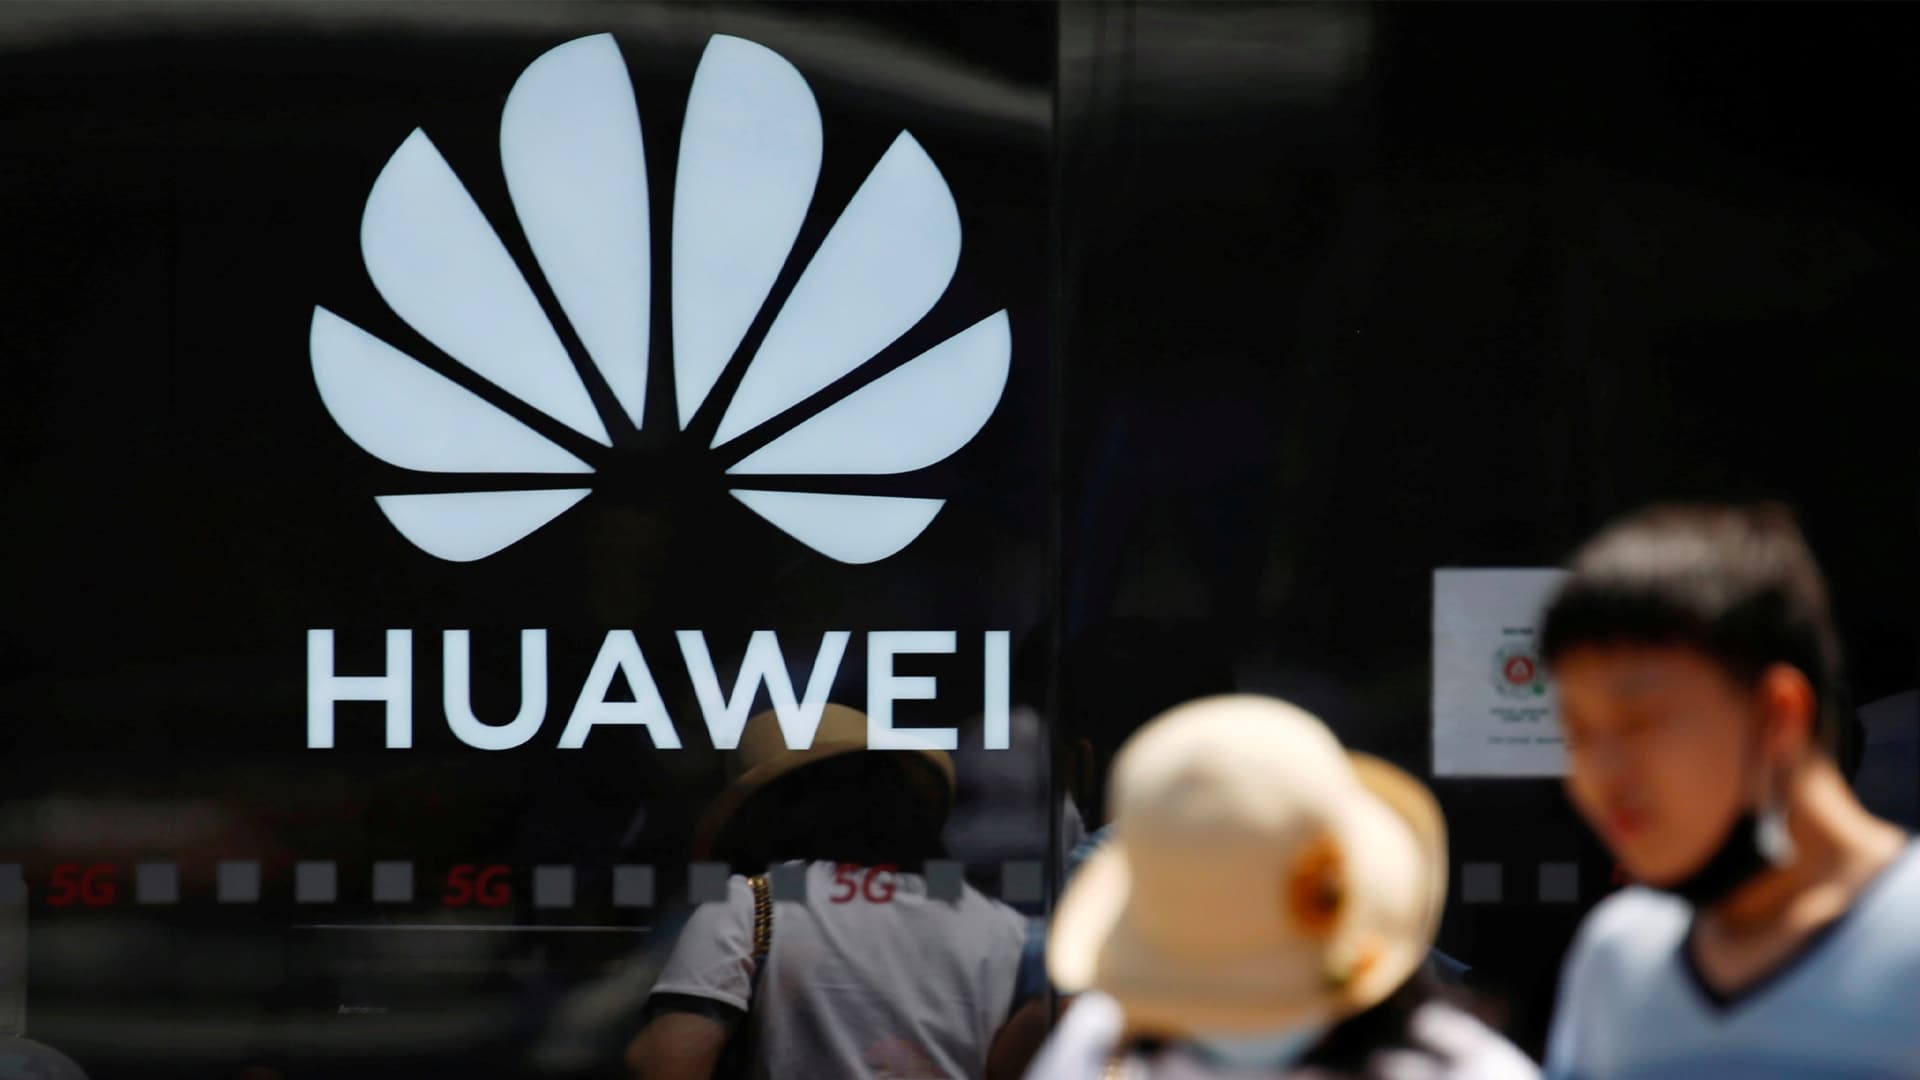 Audi, Mercedes to invest in Huawei? Chinese tech giant held meetings exploring potential EV partnership